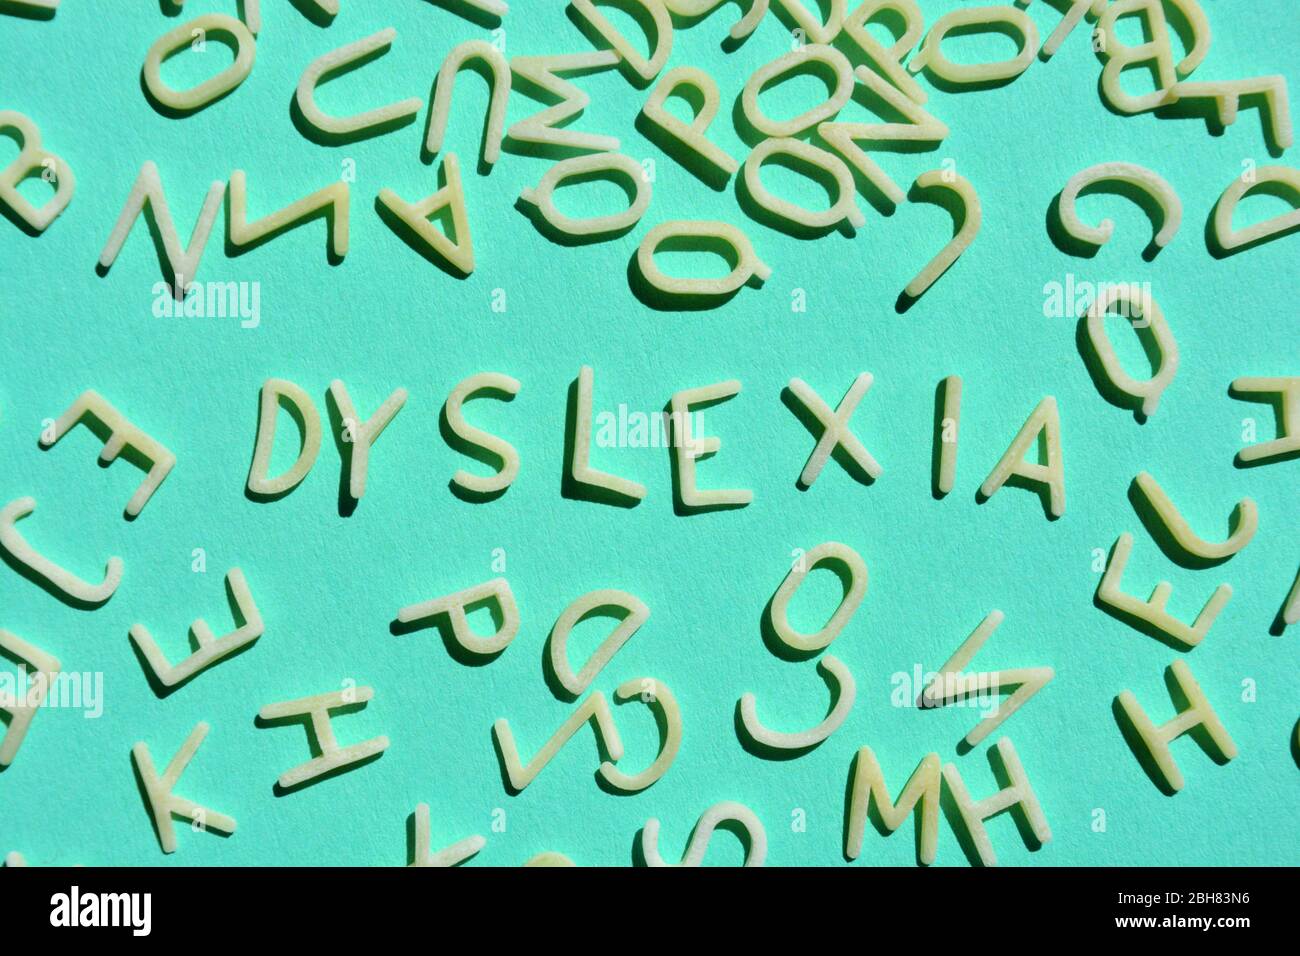 Dyslexia, word surrounded by random letters Stock Photo